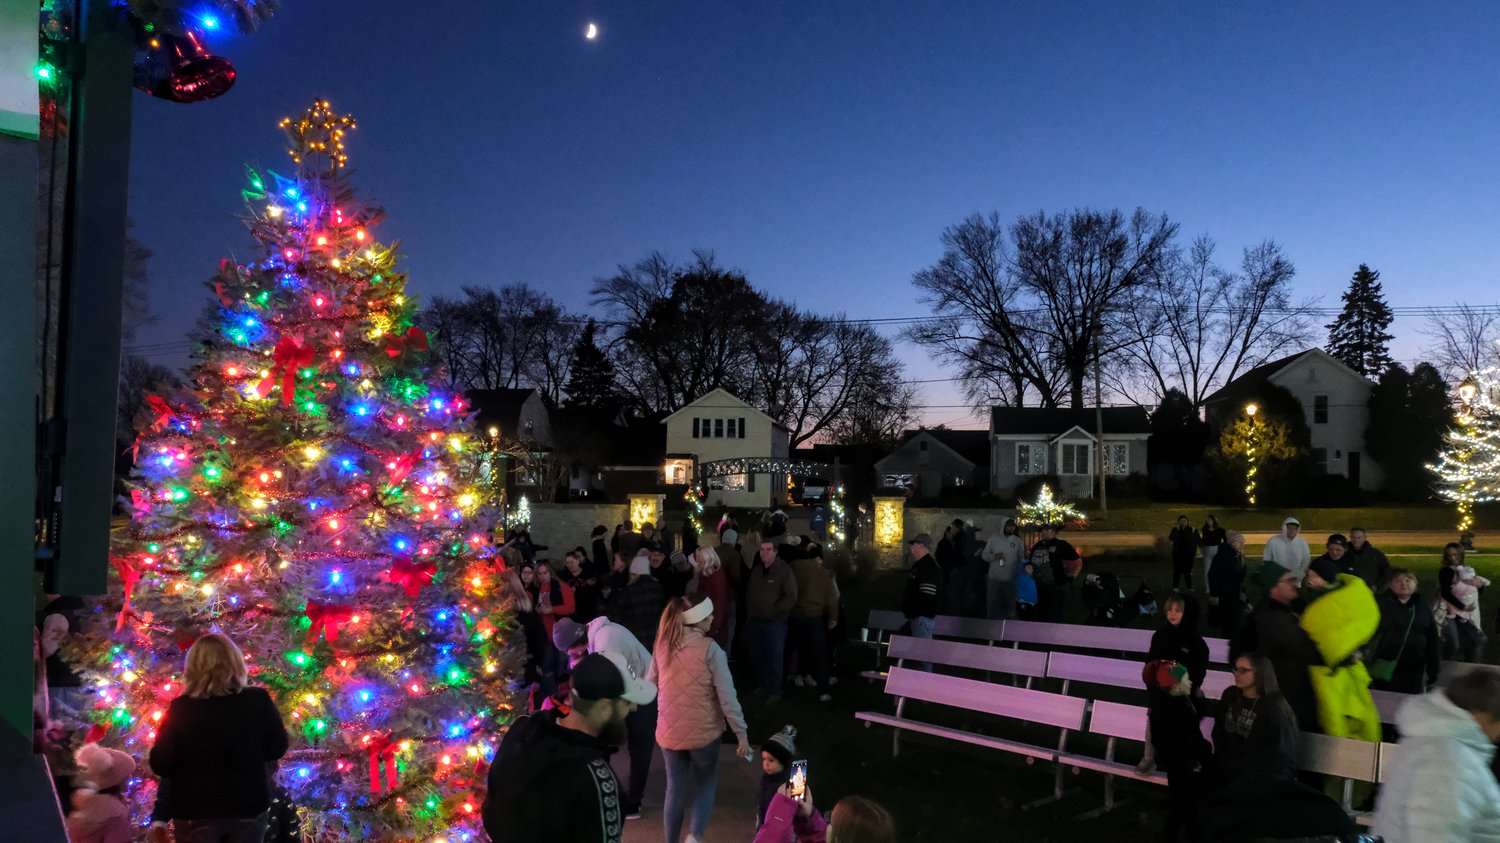 View of Christmas tree and crowd from gazebo.